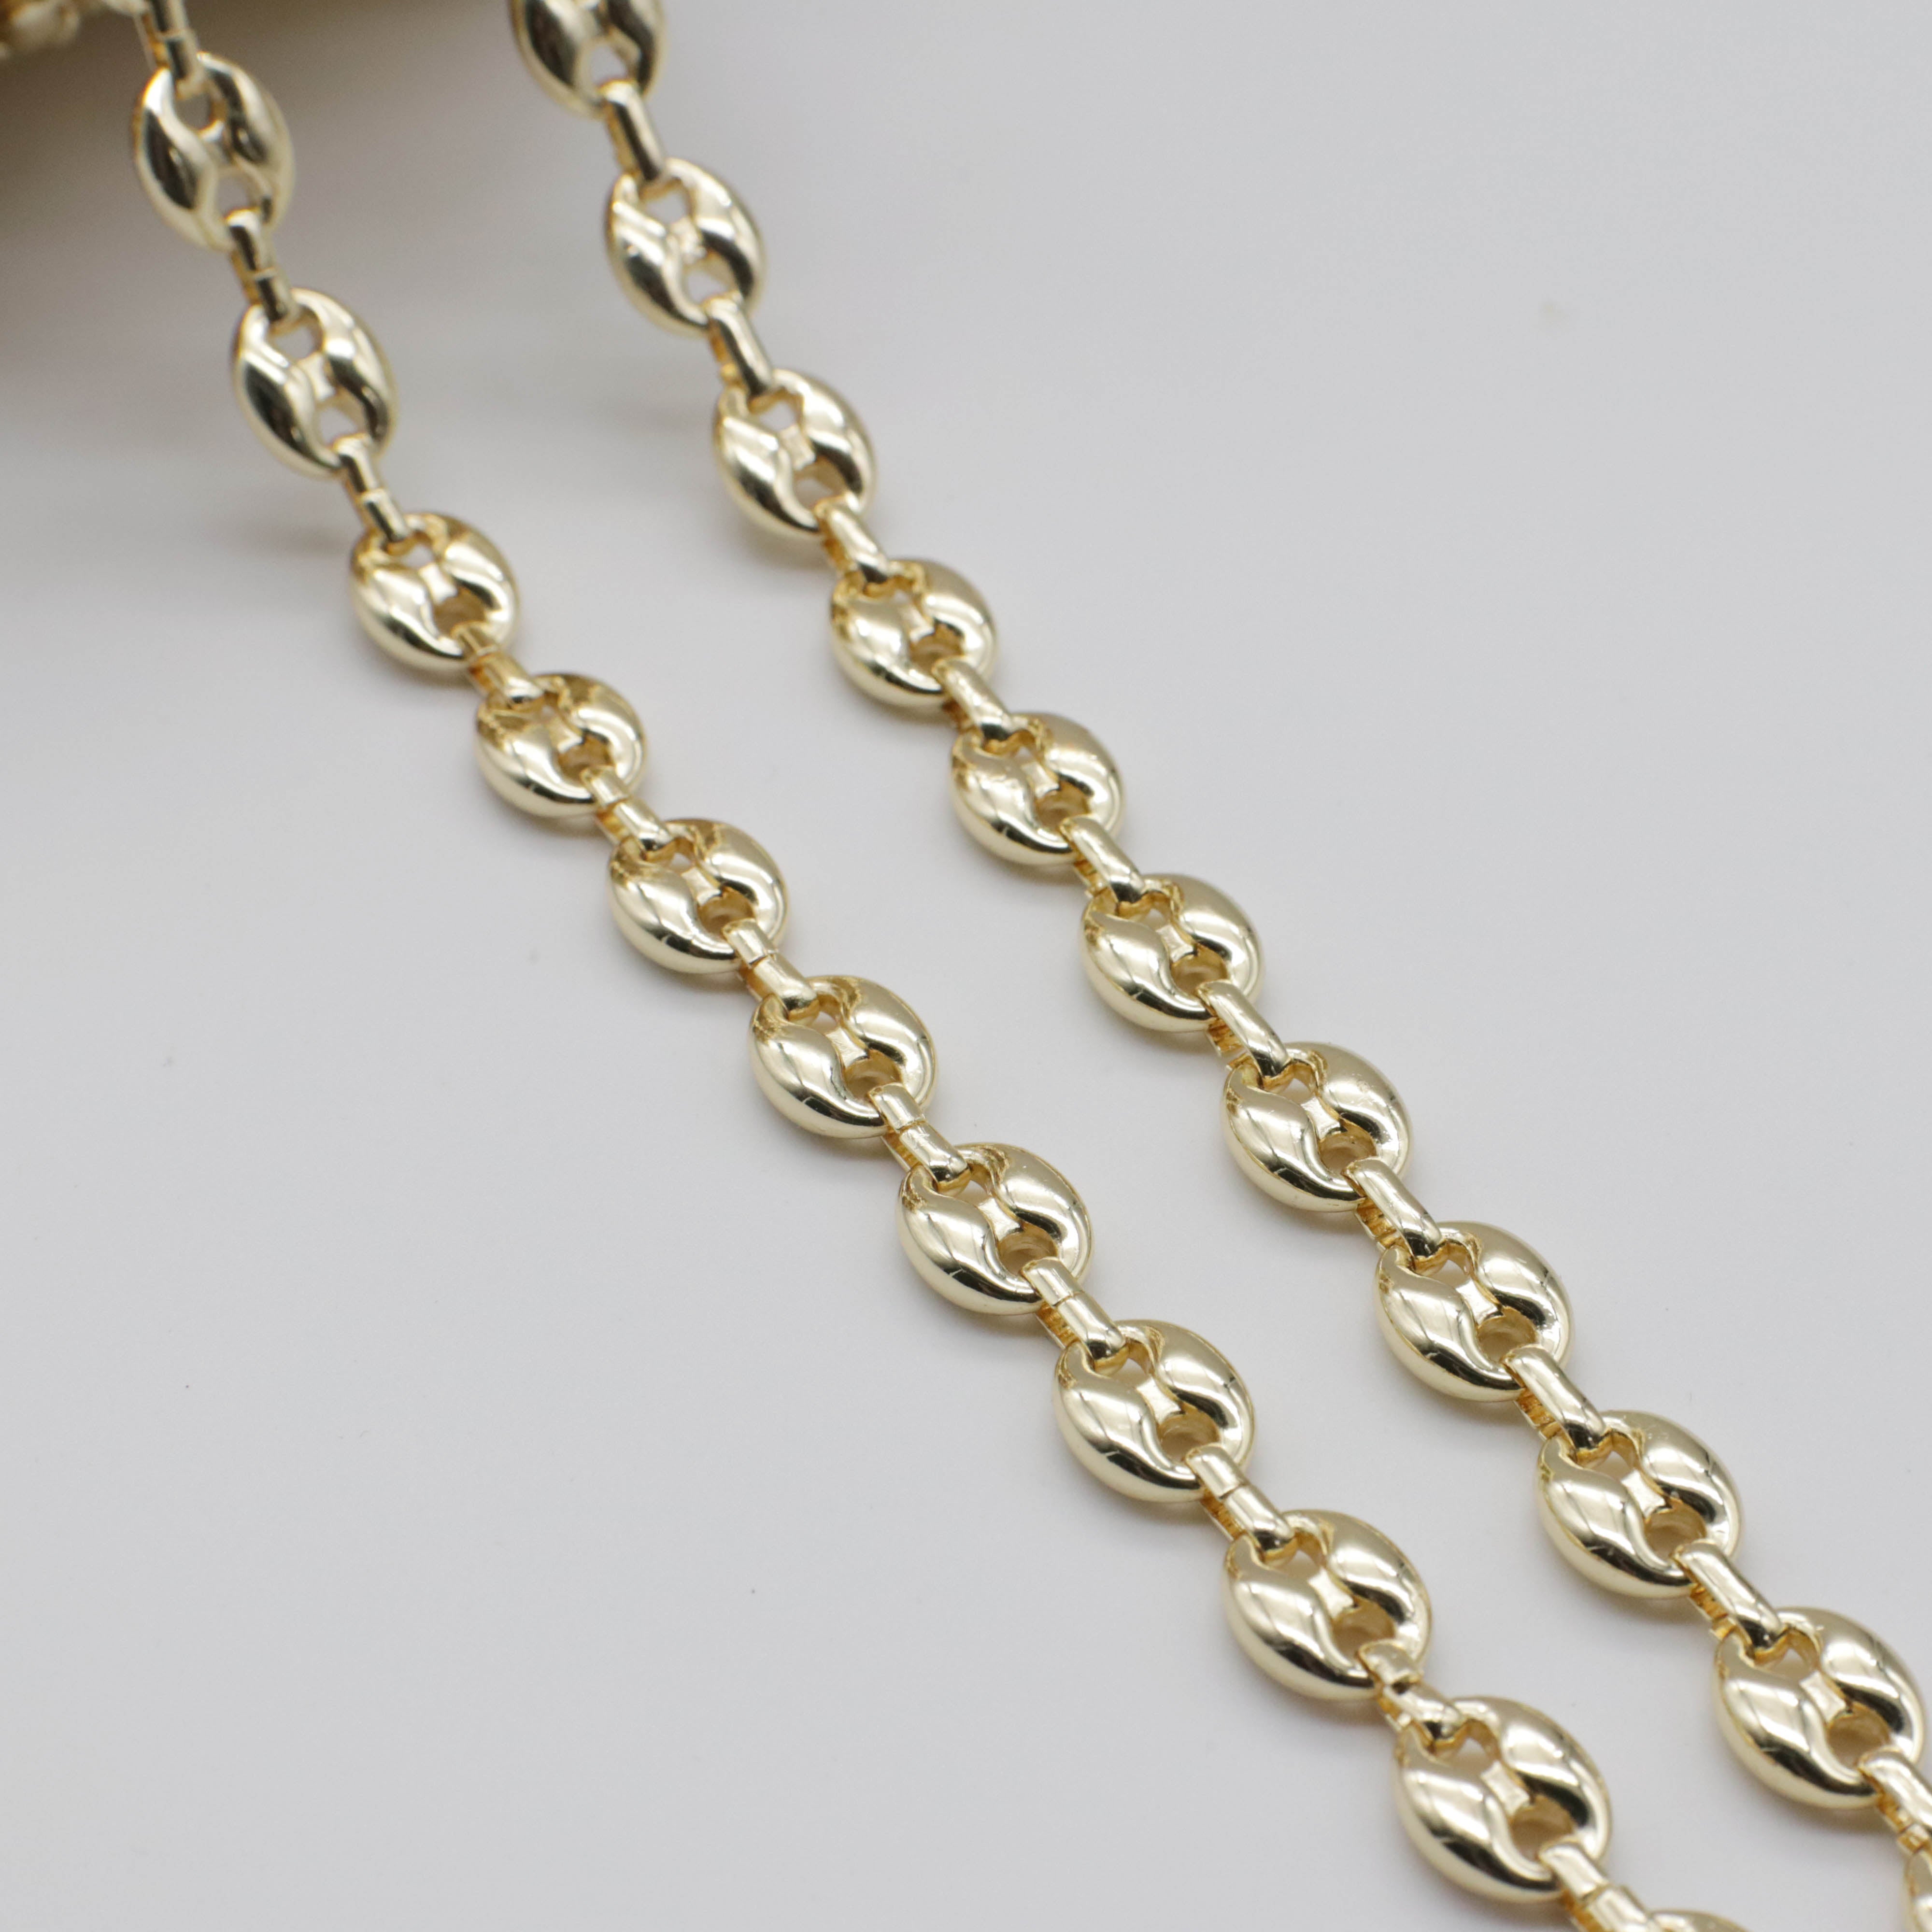 10x13MM Alloy Chain 4 mm Thickness Width 2x9 mm Link Wire Gold Plated